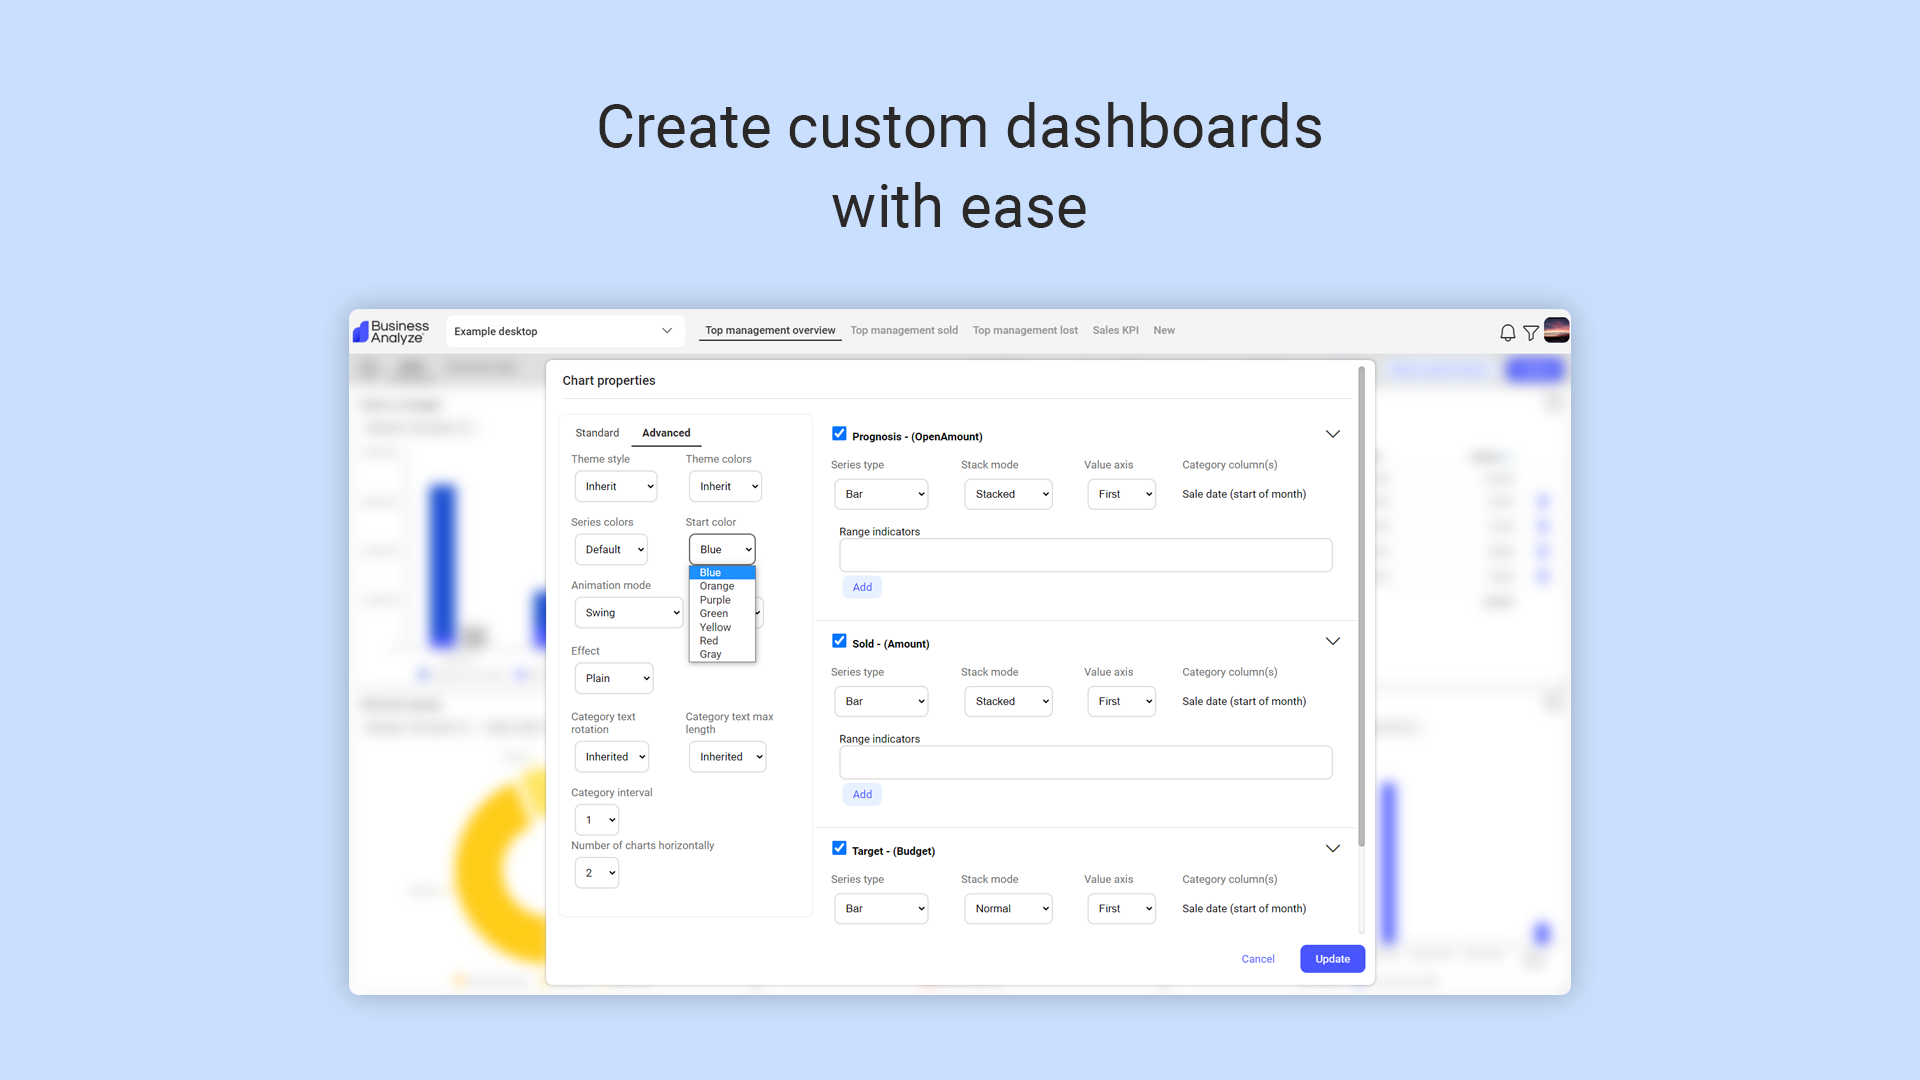 7. Create custom dashboards with ease.